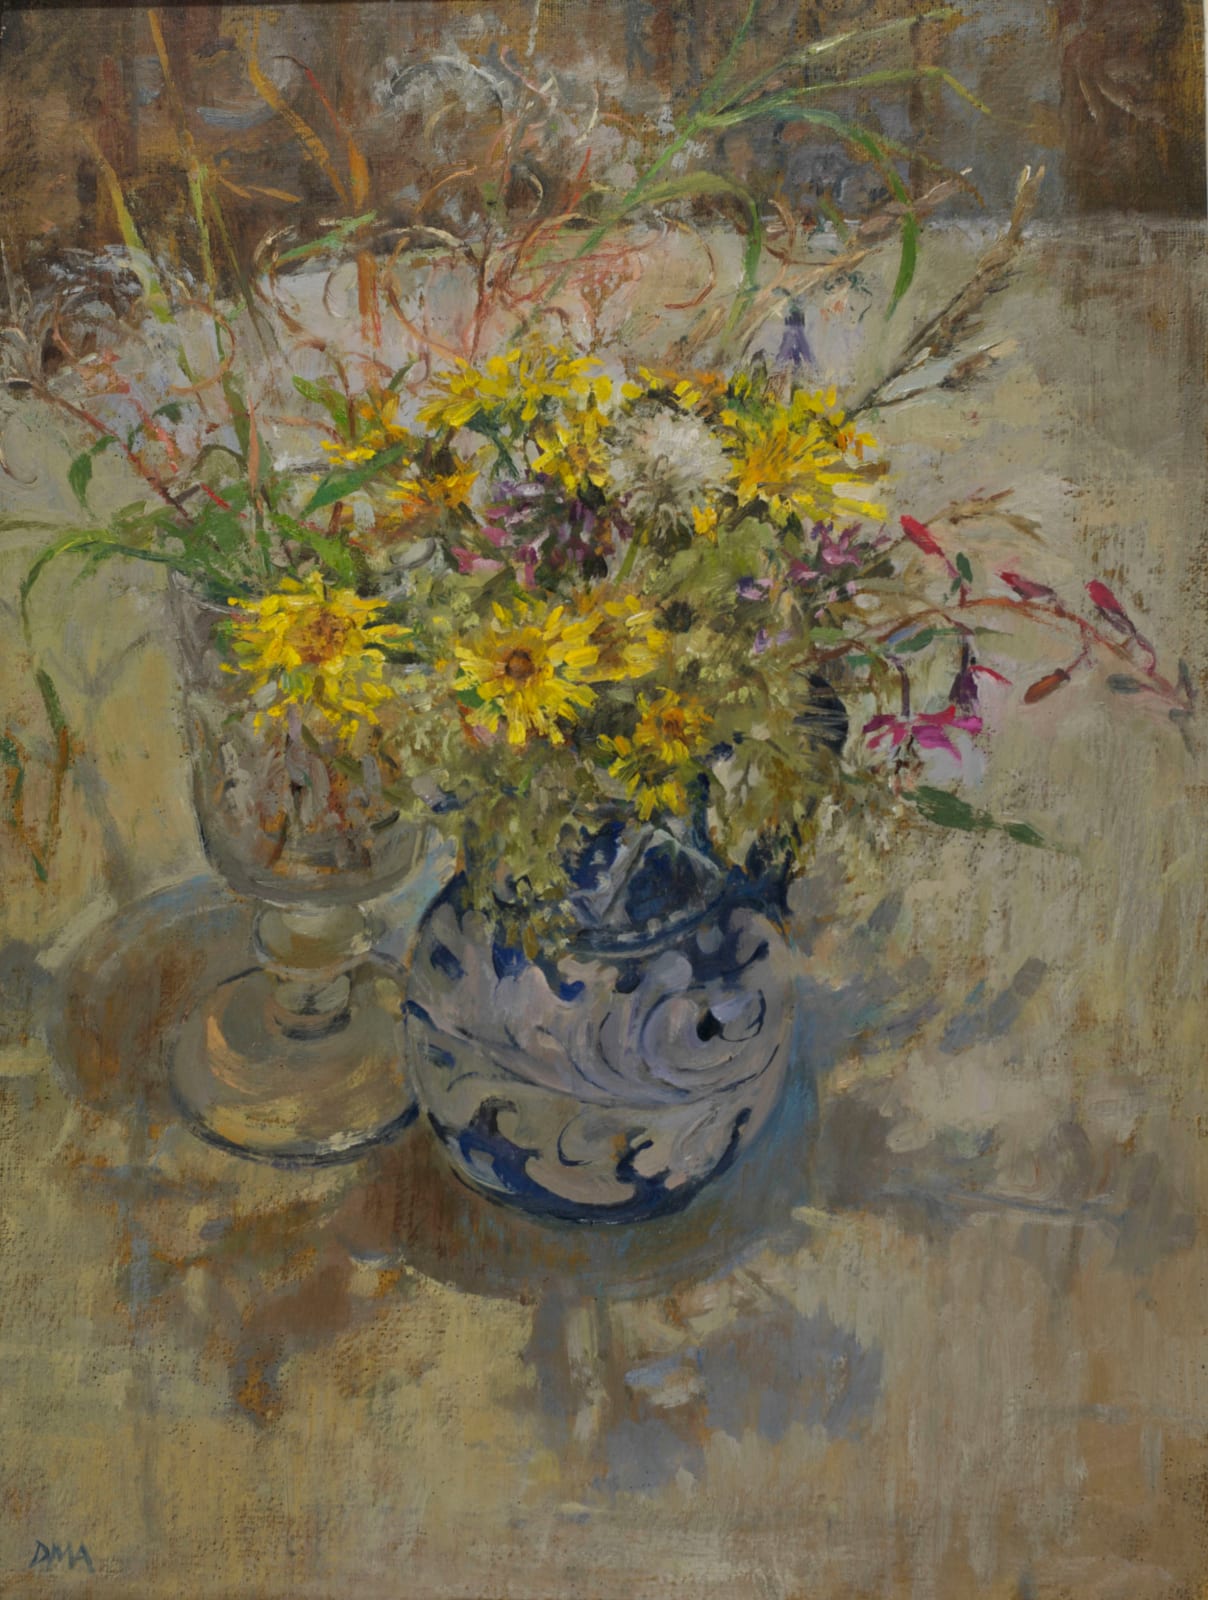 DIANA ARMFIELD, The Orvieto Jug with Wild Flowers and a Goblet